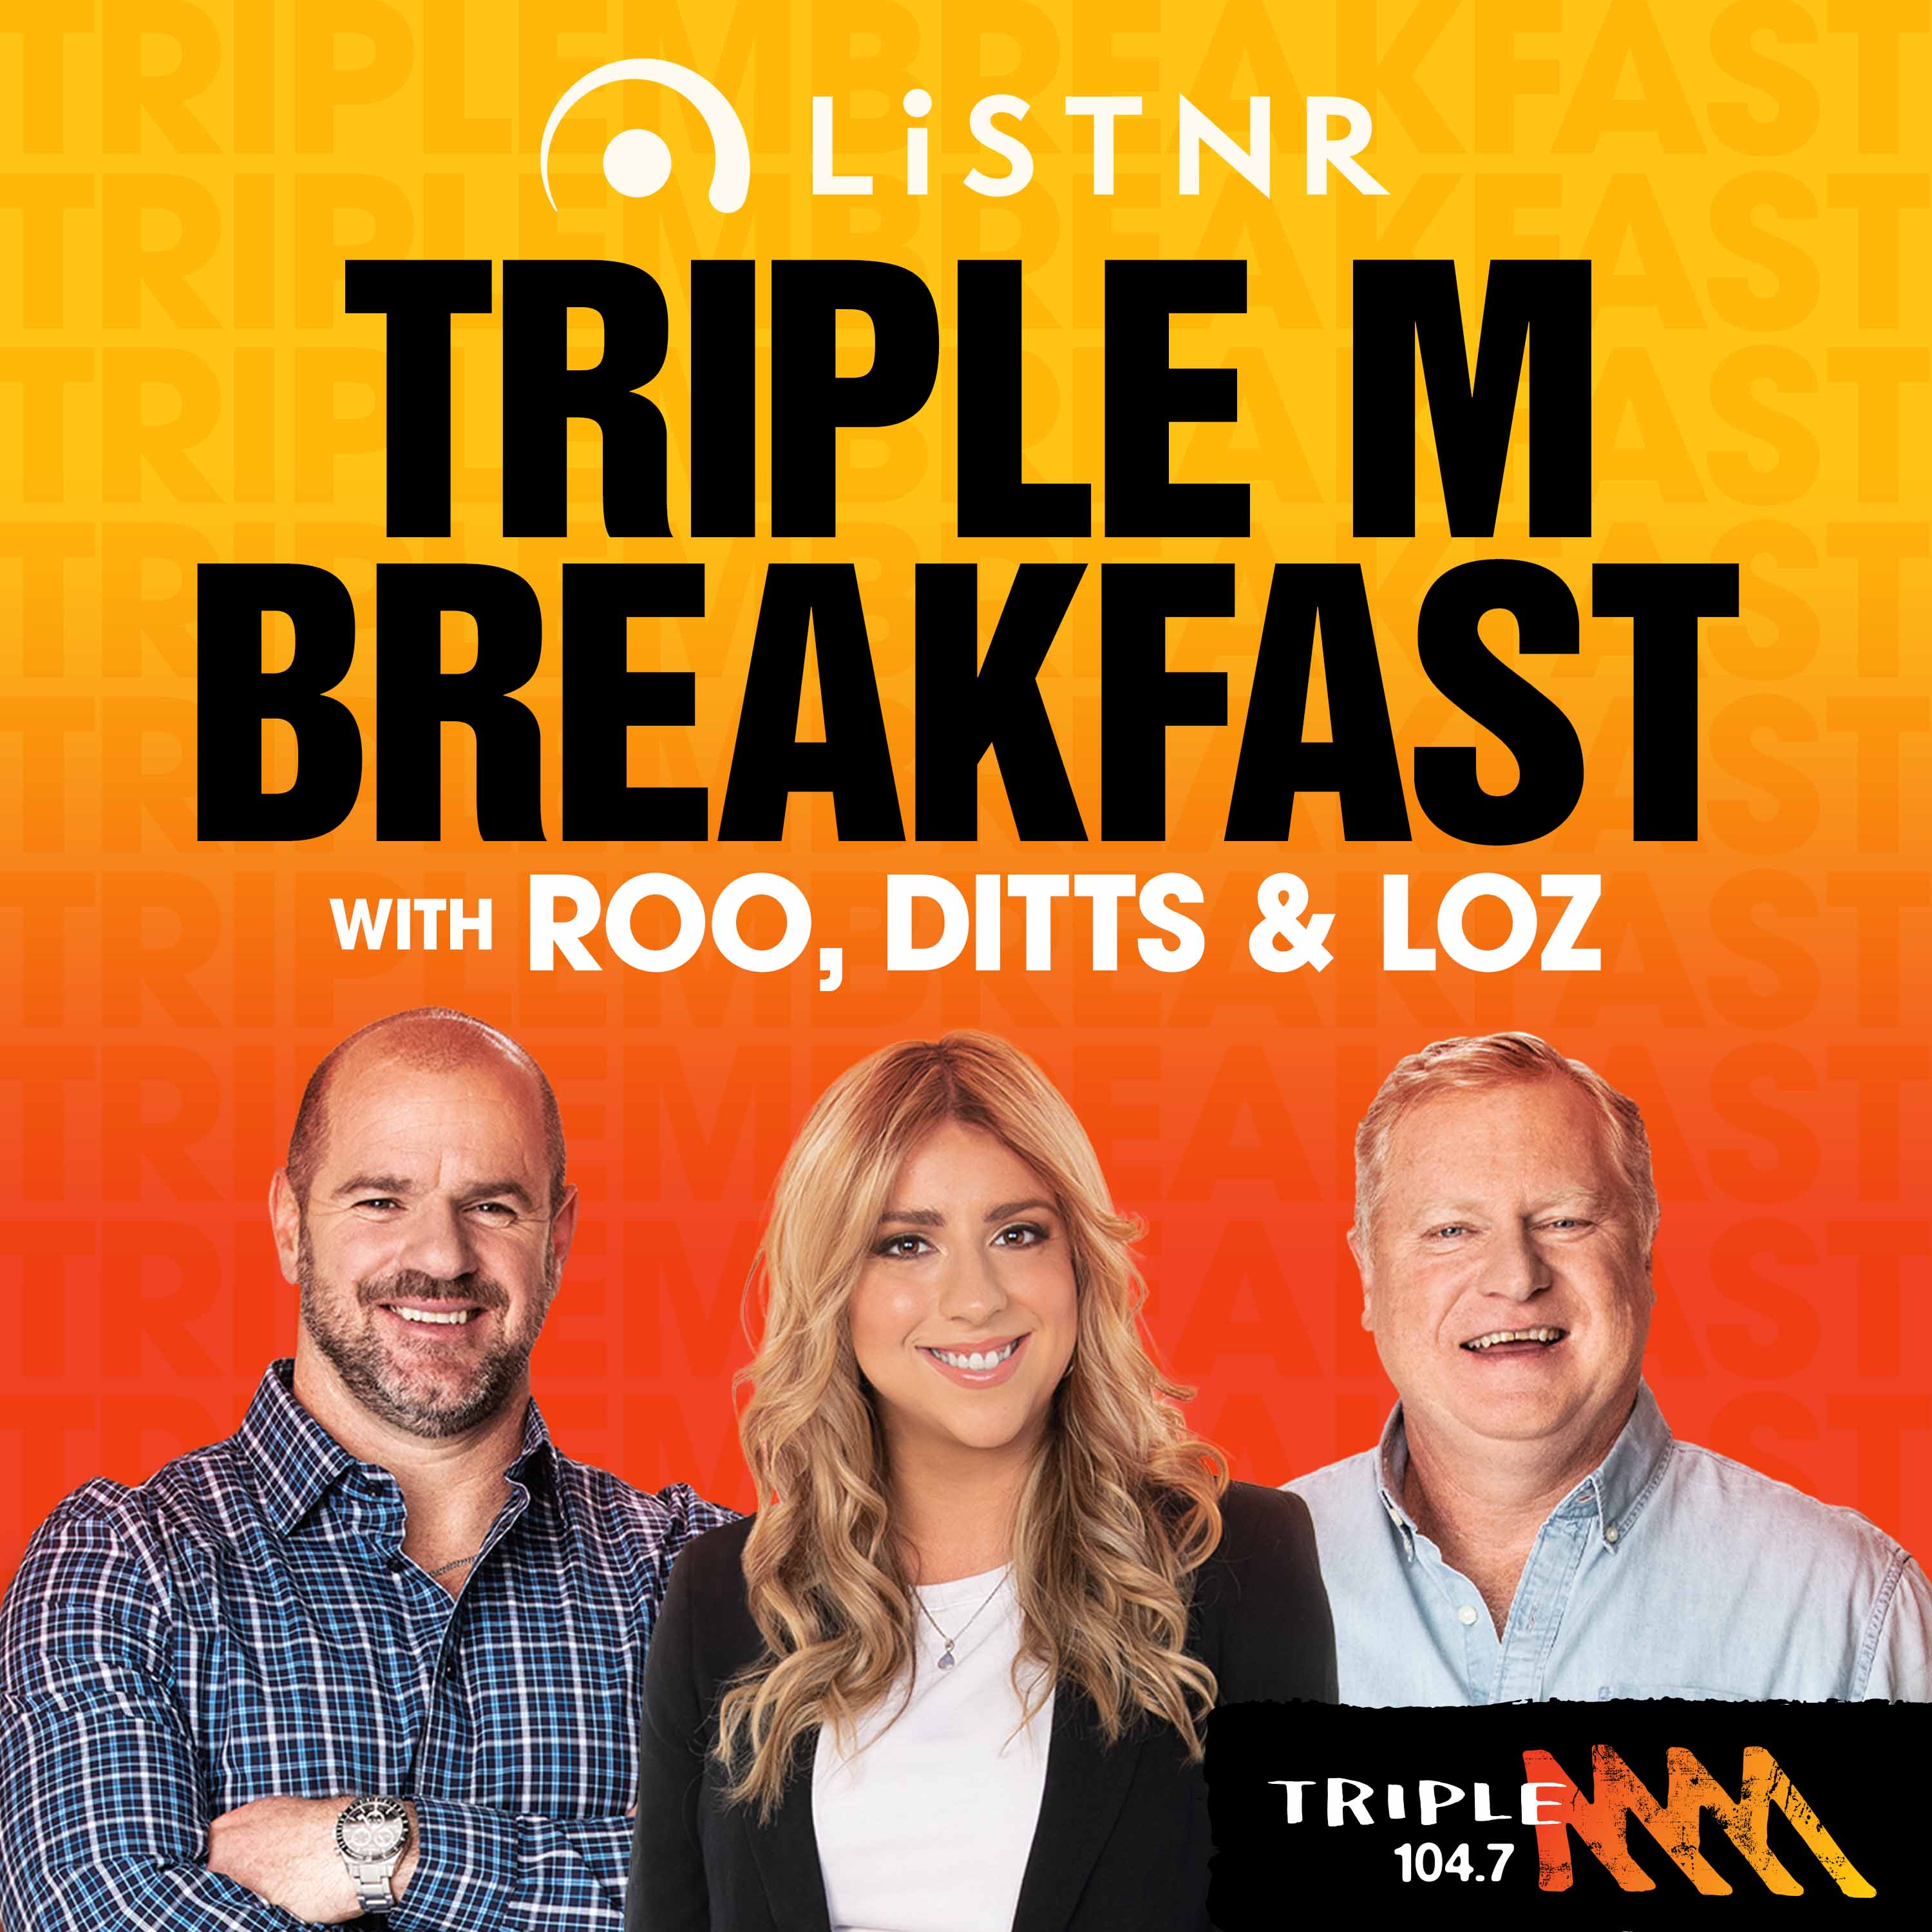 Mark Waugh on joining Triple M Cricket for 2022/23, which caller is the biggest pest and more